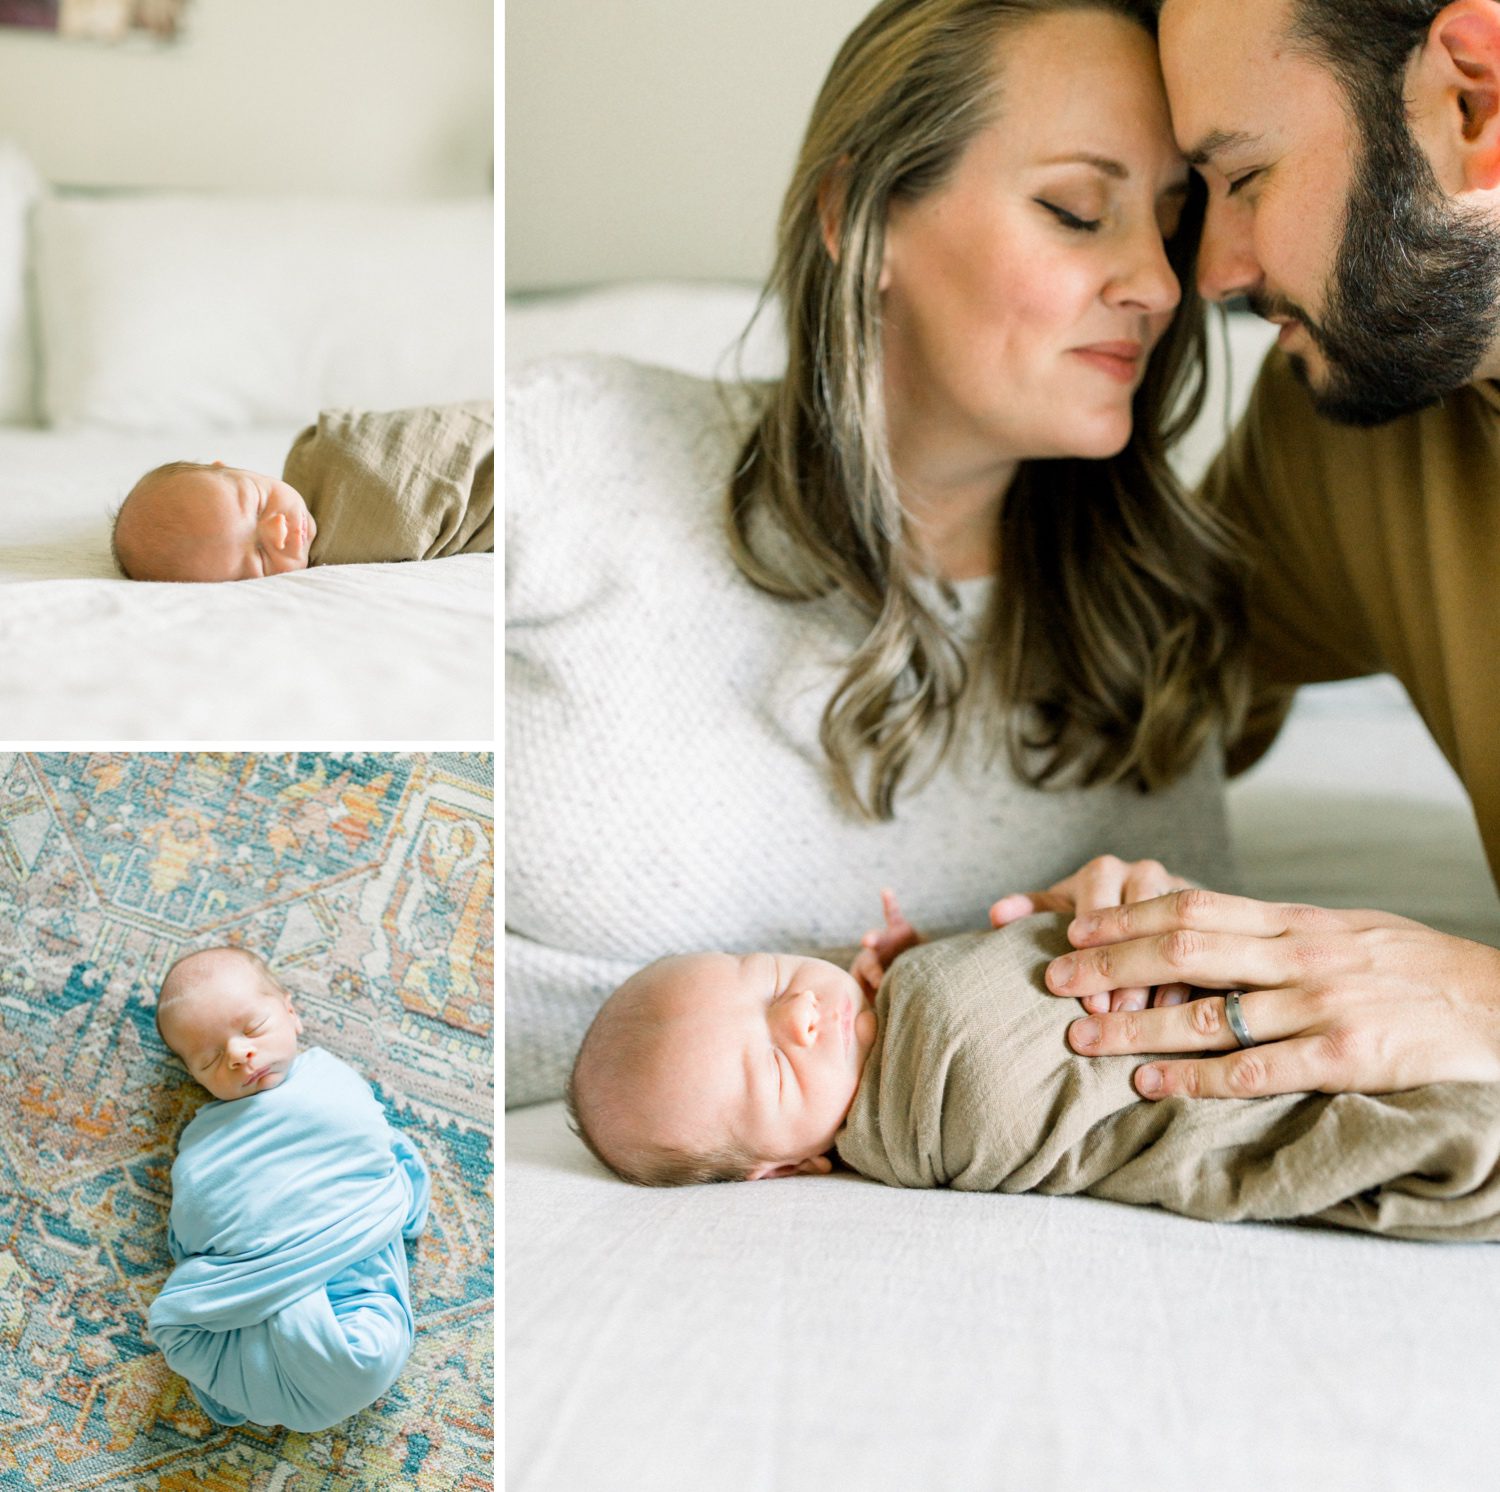 How early should I schedule newborn photos, how early should you schedule newborn photos, when should I schedule newborn photos, scheduling your newborn photos, scheduling newborn photos, when should we take newborn photos, thousand oaks newborn photographer, thousand oaks newborn session, thousand oaks newborn photos, scheduling a lifestyle newborn session, scheduling a newborn session, when should I schedule a in home newborn session, when should I schedule a newborn photoshoot